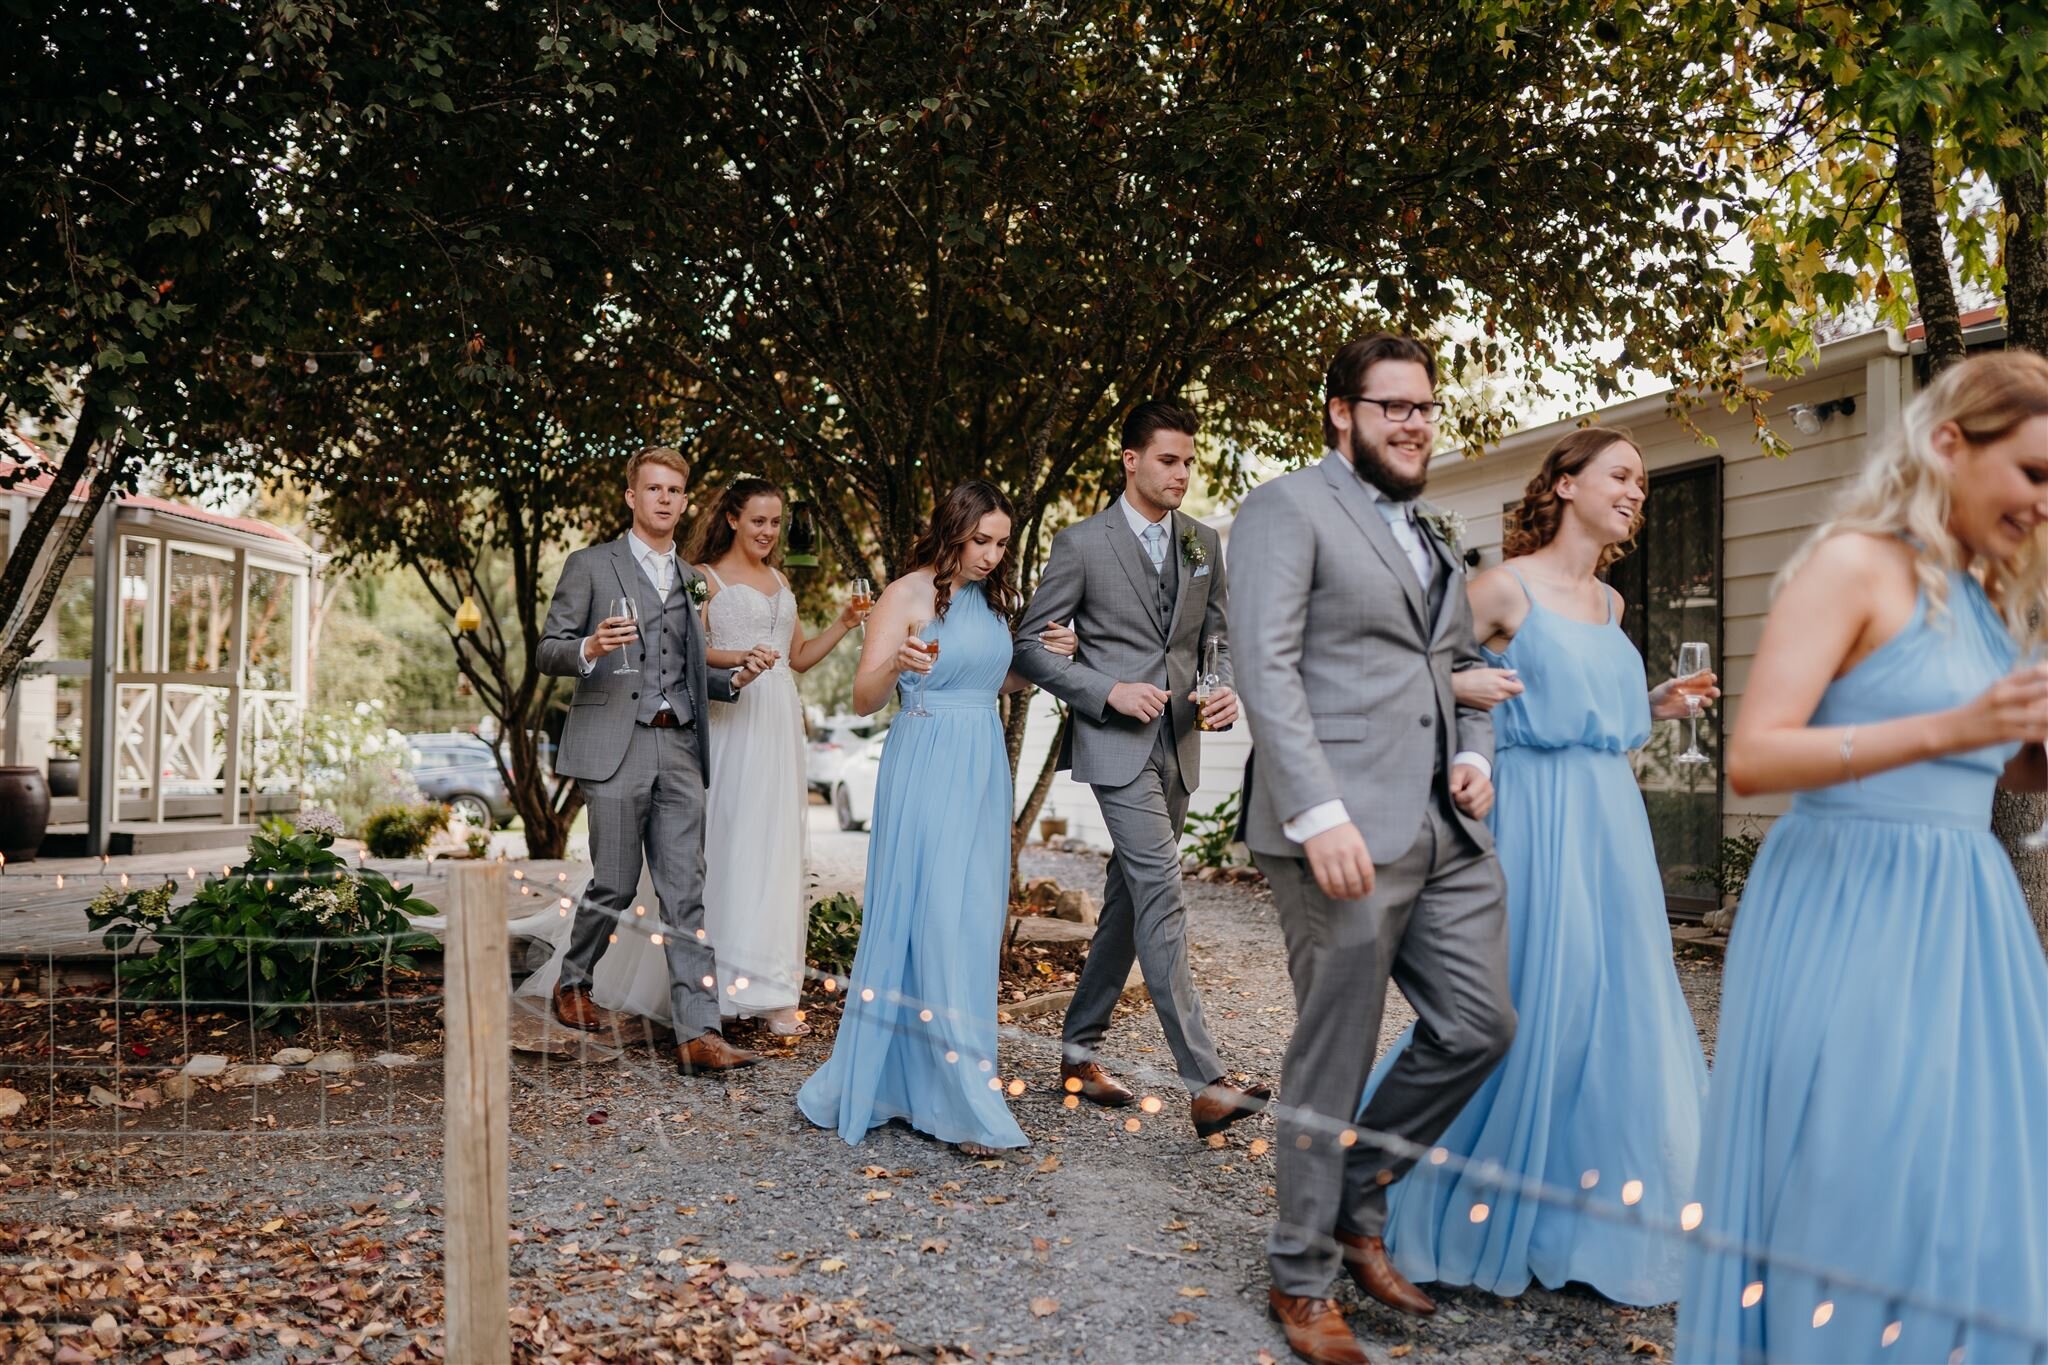 Here Comes the Bridal Party!